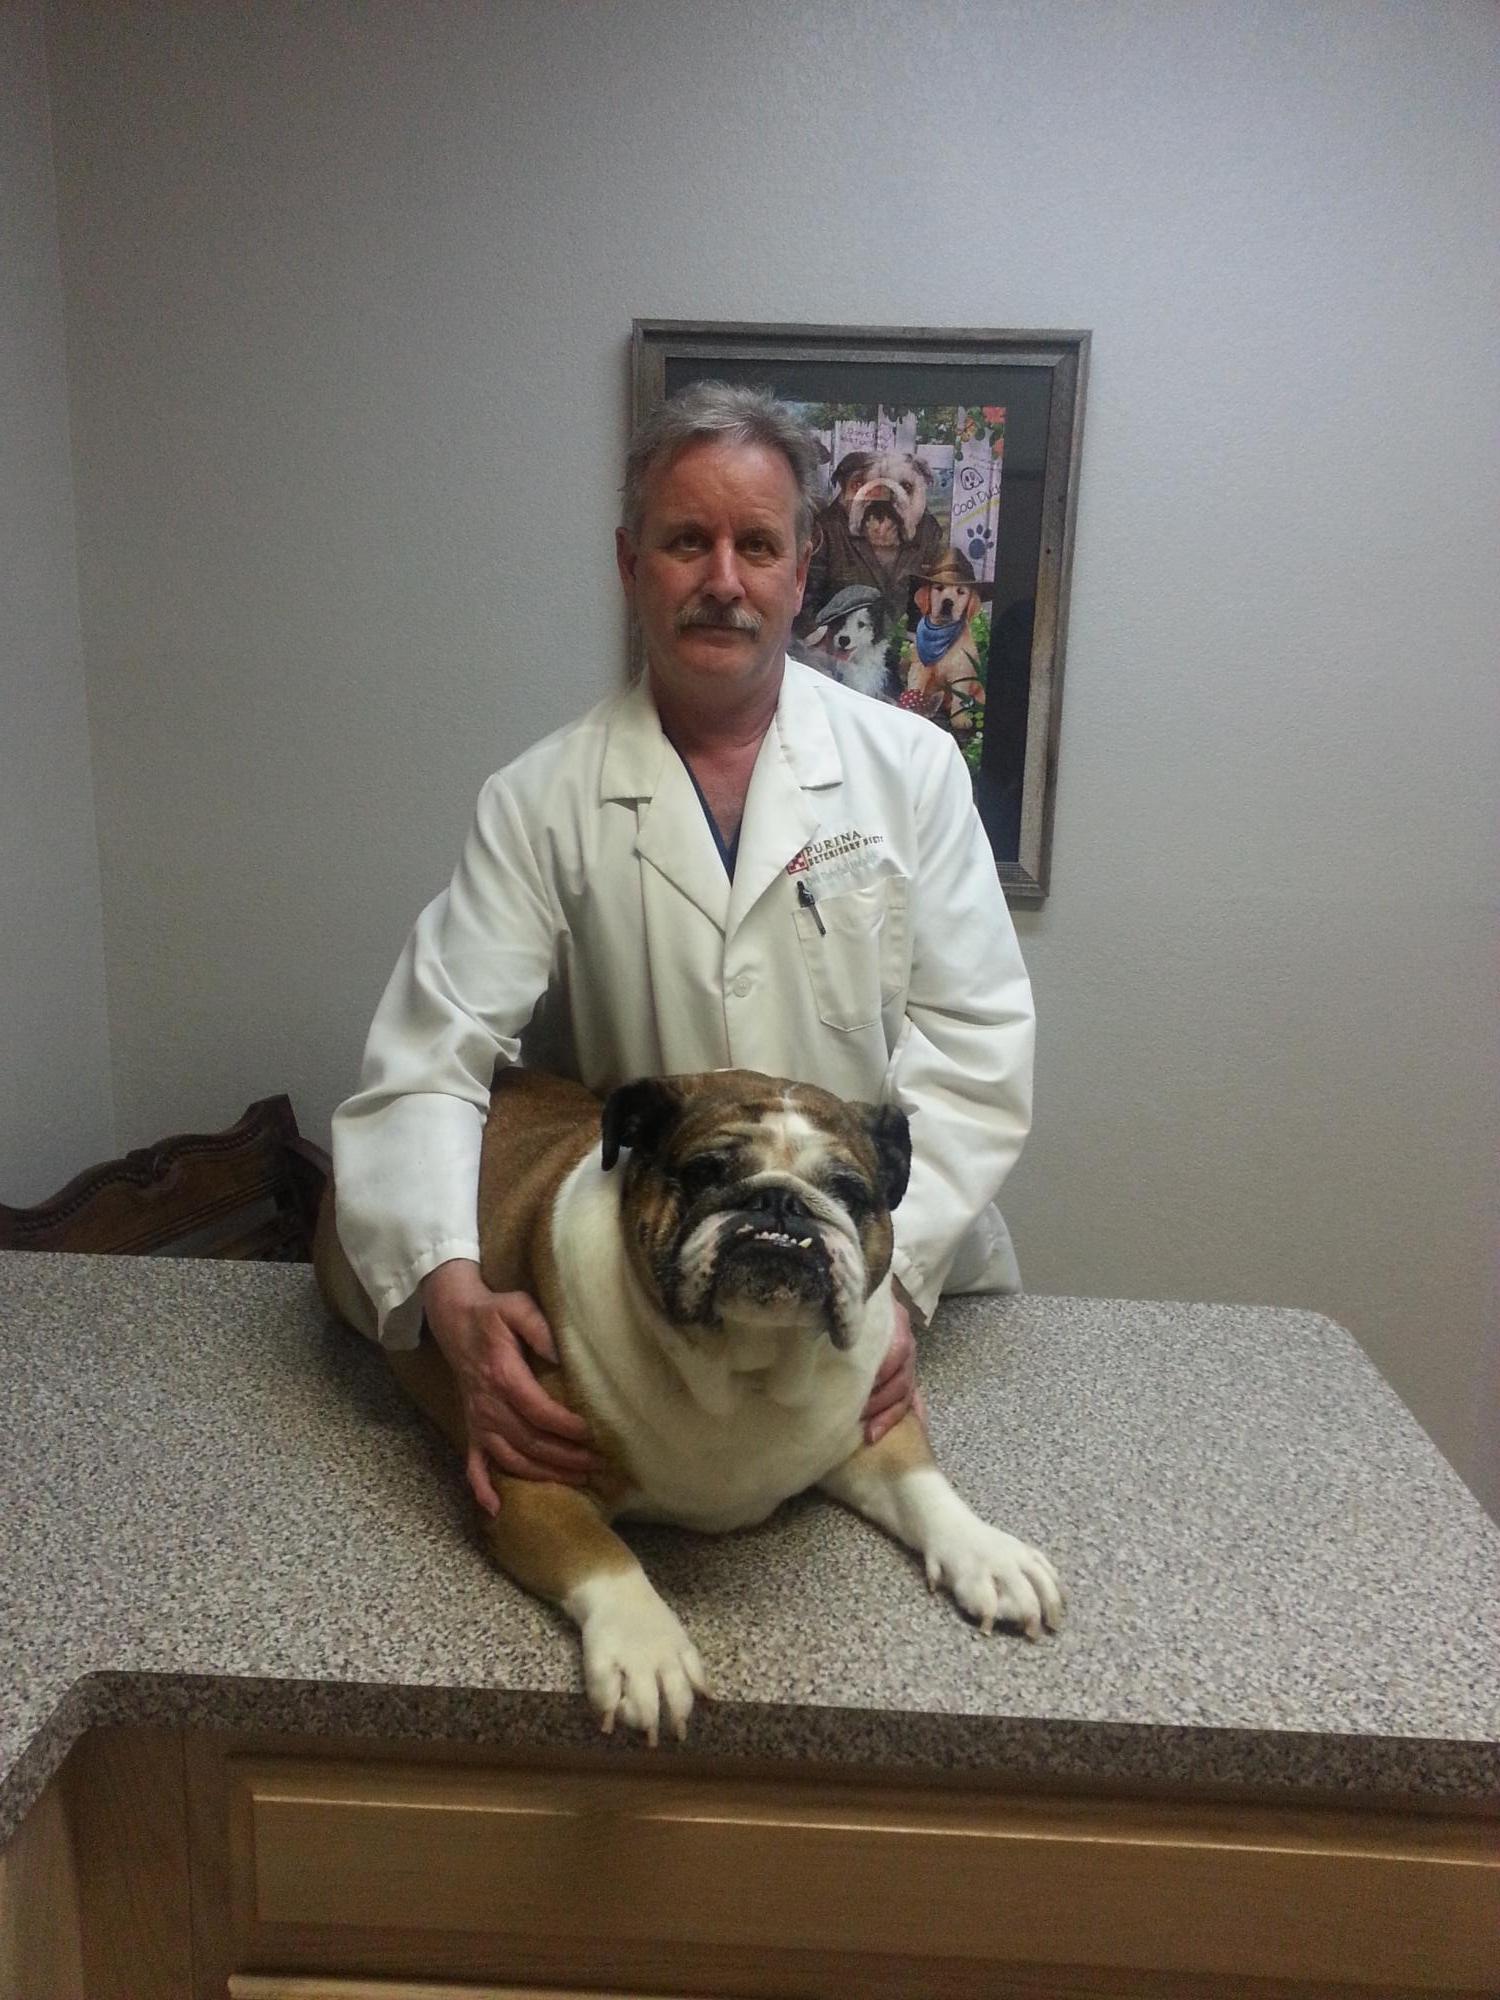 Park Place Pet Hospital - Veterinarian In Southlake, TX USA :: Meet Our Team